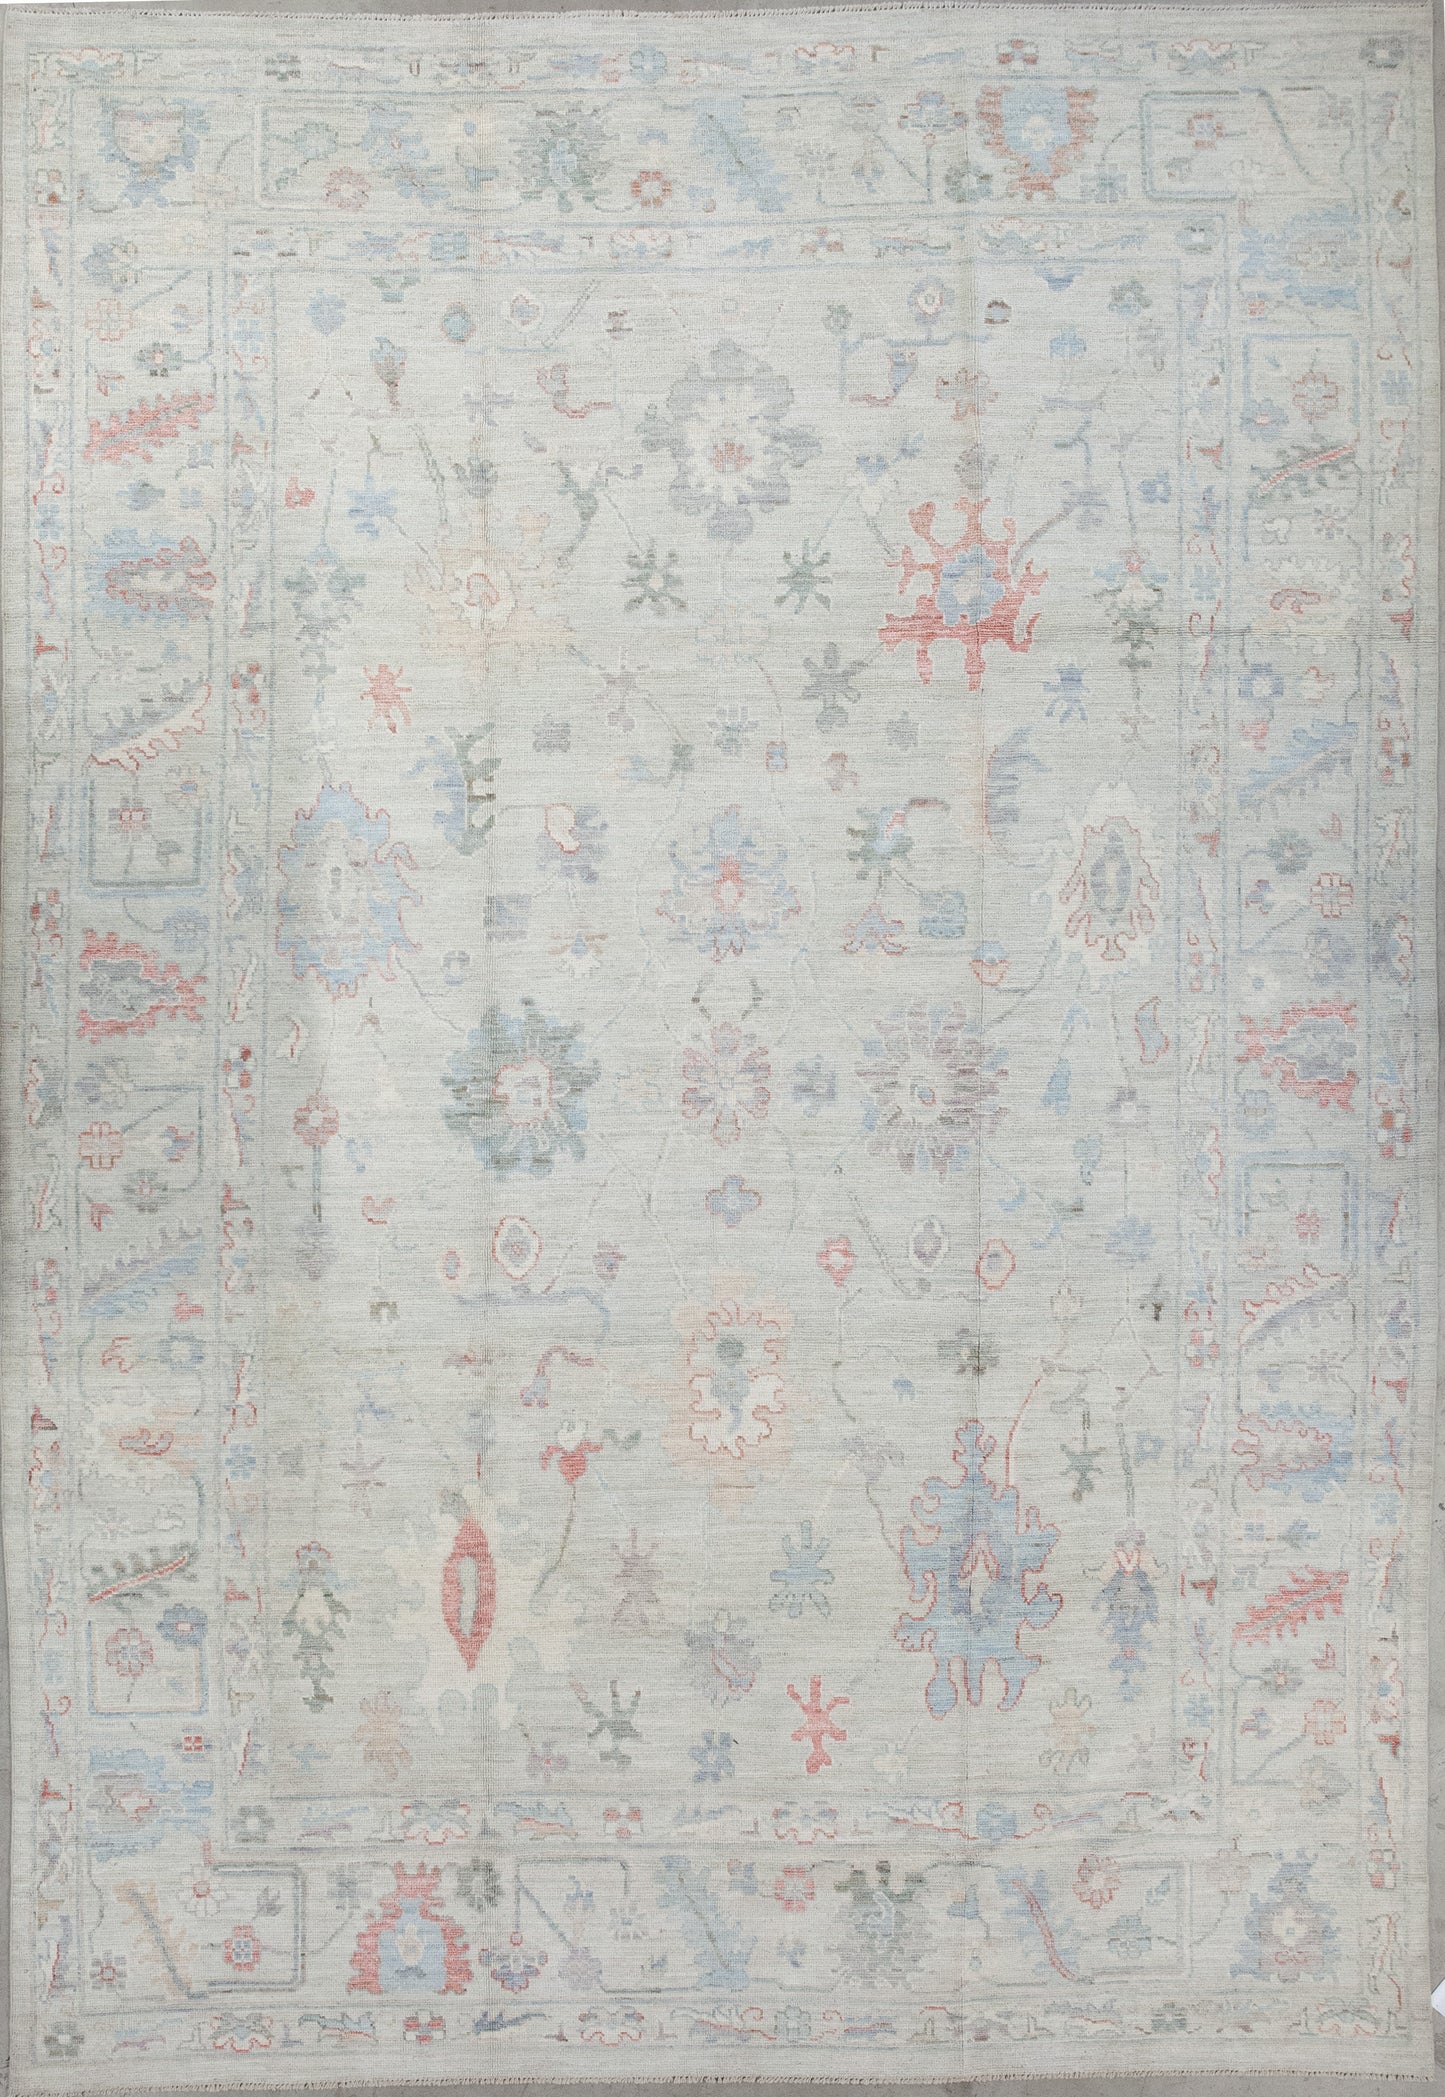 The elegant rug was woven with gray as the dominant color. On top of the rug, there is a design which renders abstract sunflowers, thin branches, paint splatters, and long leaves.